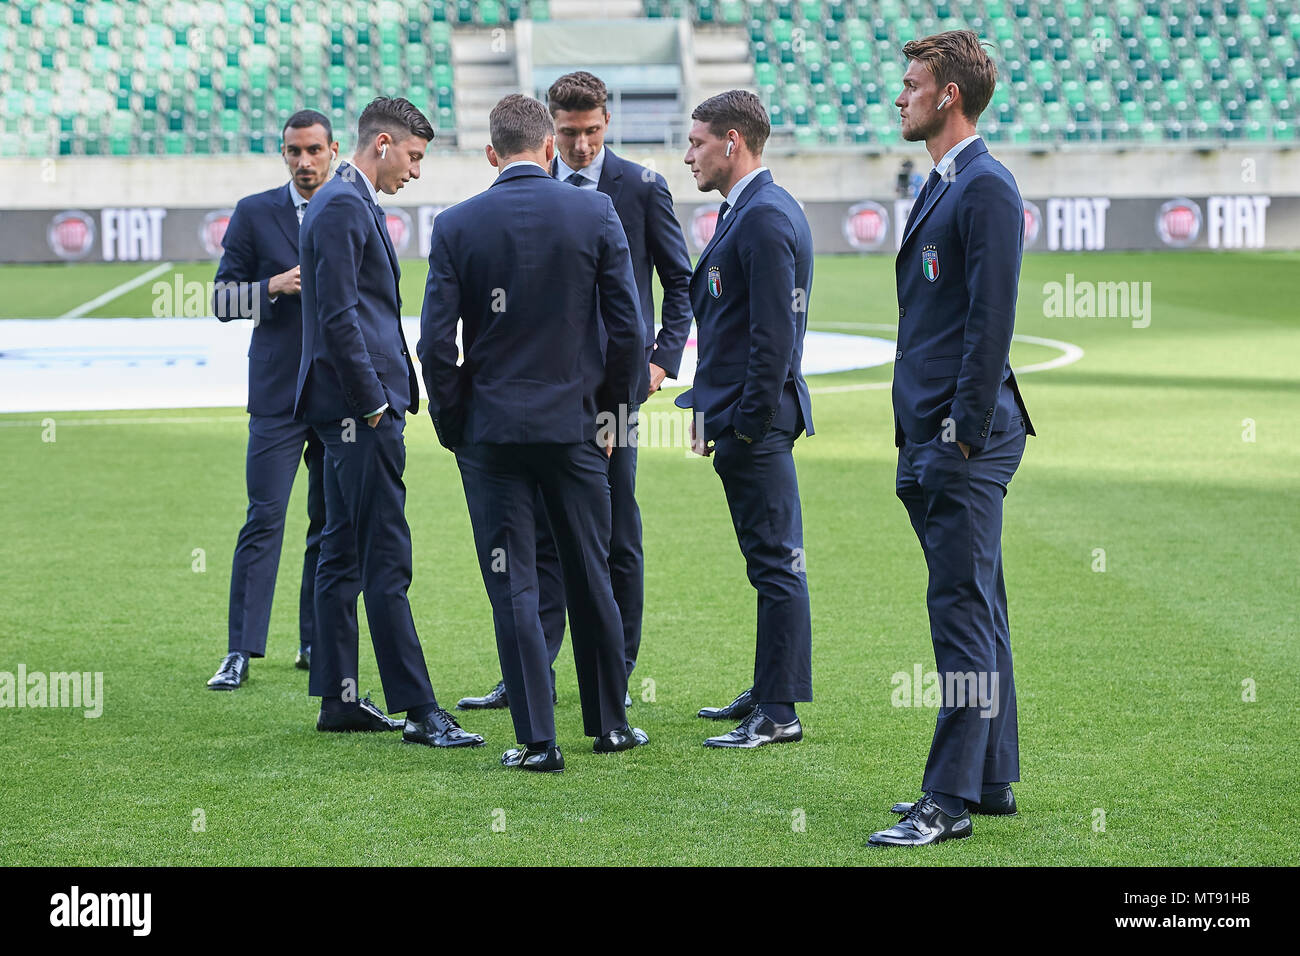 St. Gallen, Switzerland. 28th May 2018. Italy players before the football World Cup 2018 preparation match Italy vs. Saudi Arabia in St. Gallen. The national team from Saudi Arabia is using the game to prepare for the 2018 FIFA World Cup final tournament in Russia while Italy did not qualify for the World Cup finals. Stock Photo